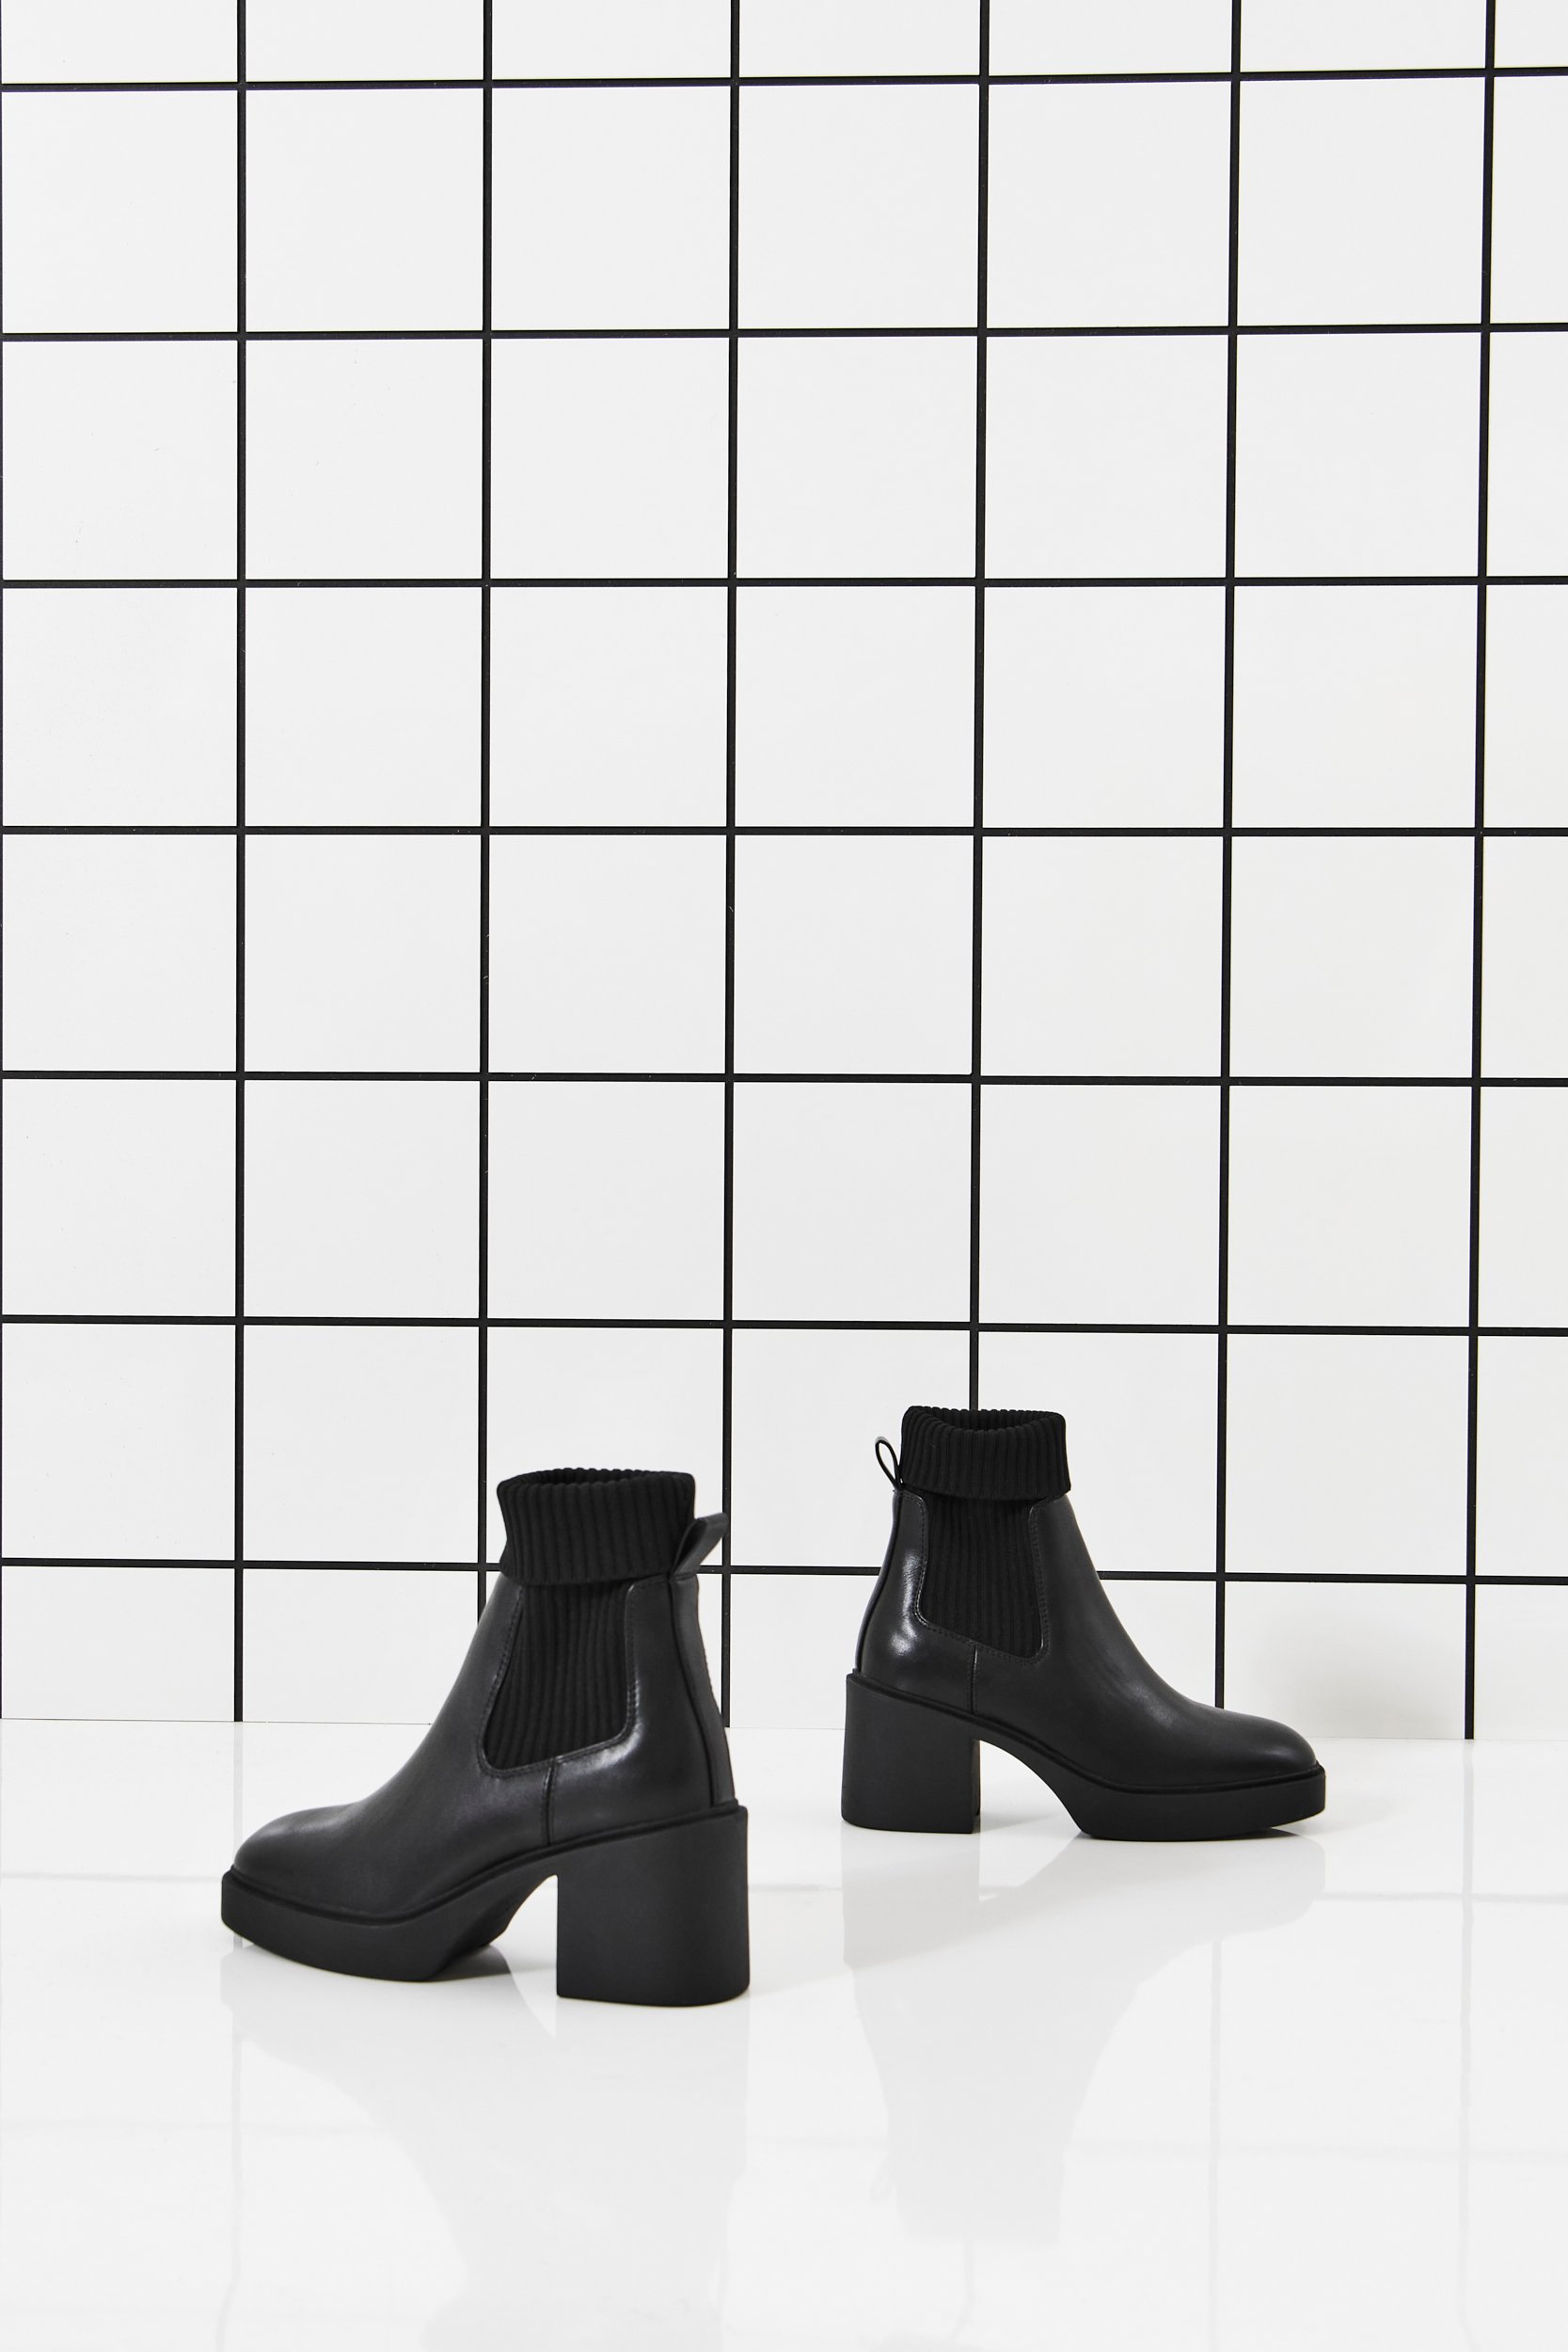 ONLY SHOES AW22_LOOK_23_2044.jpg